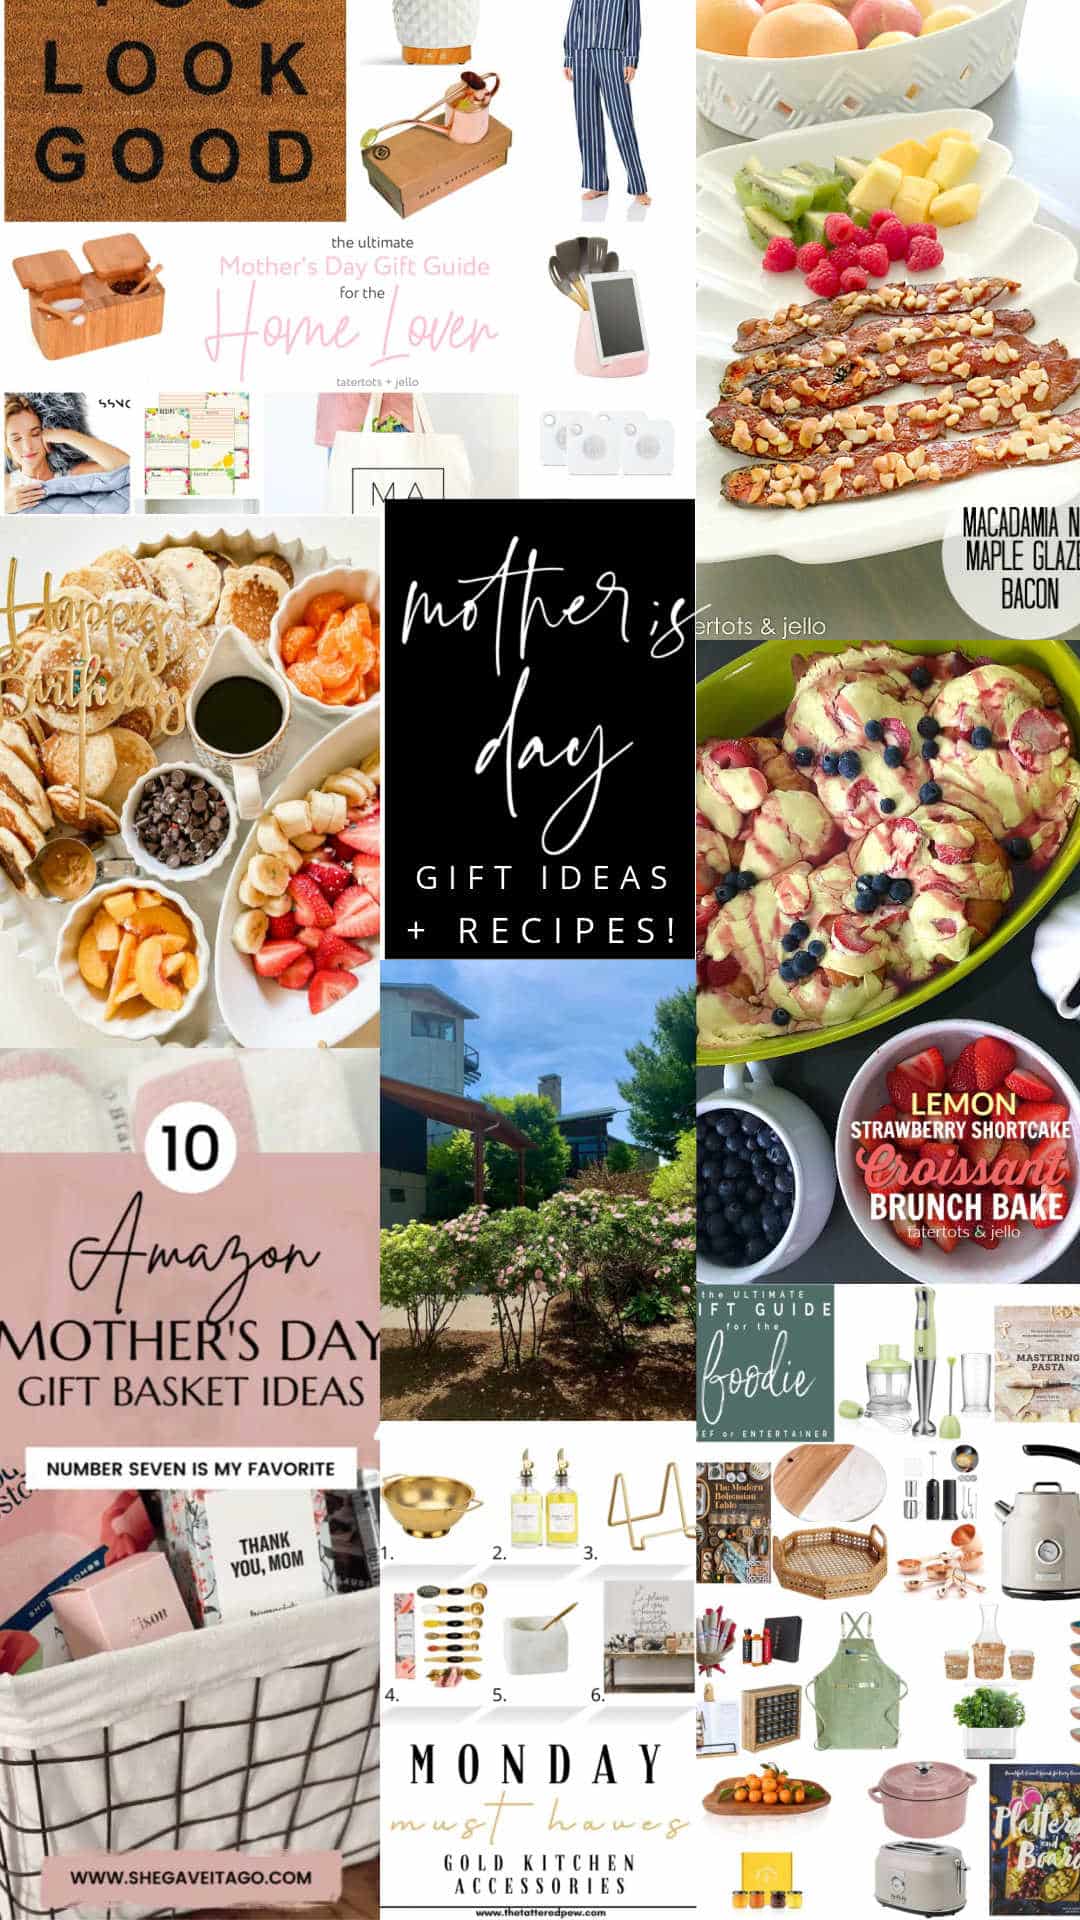 The best Mother's Day gifts for foodies